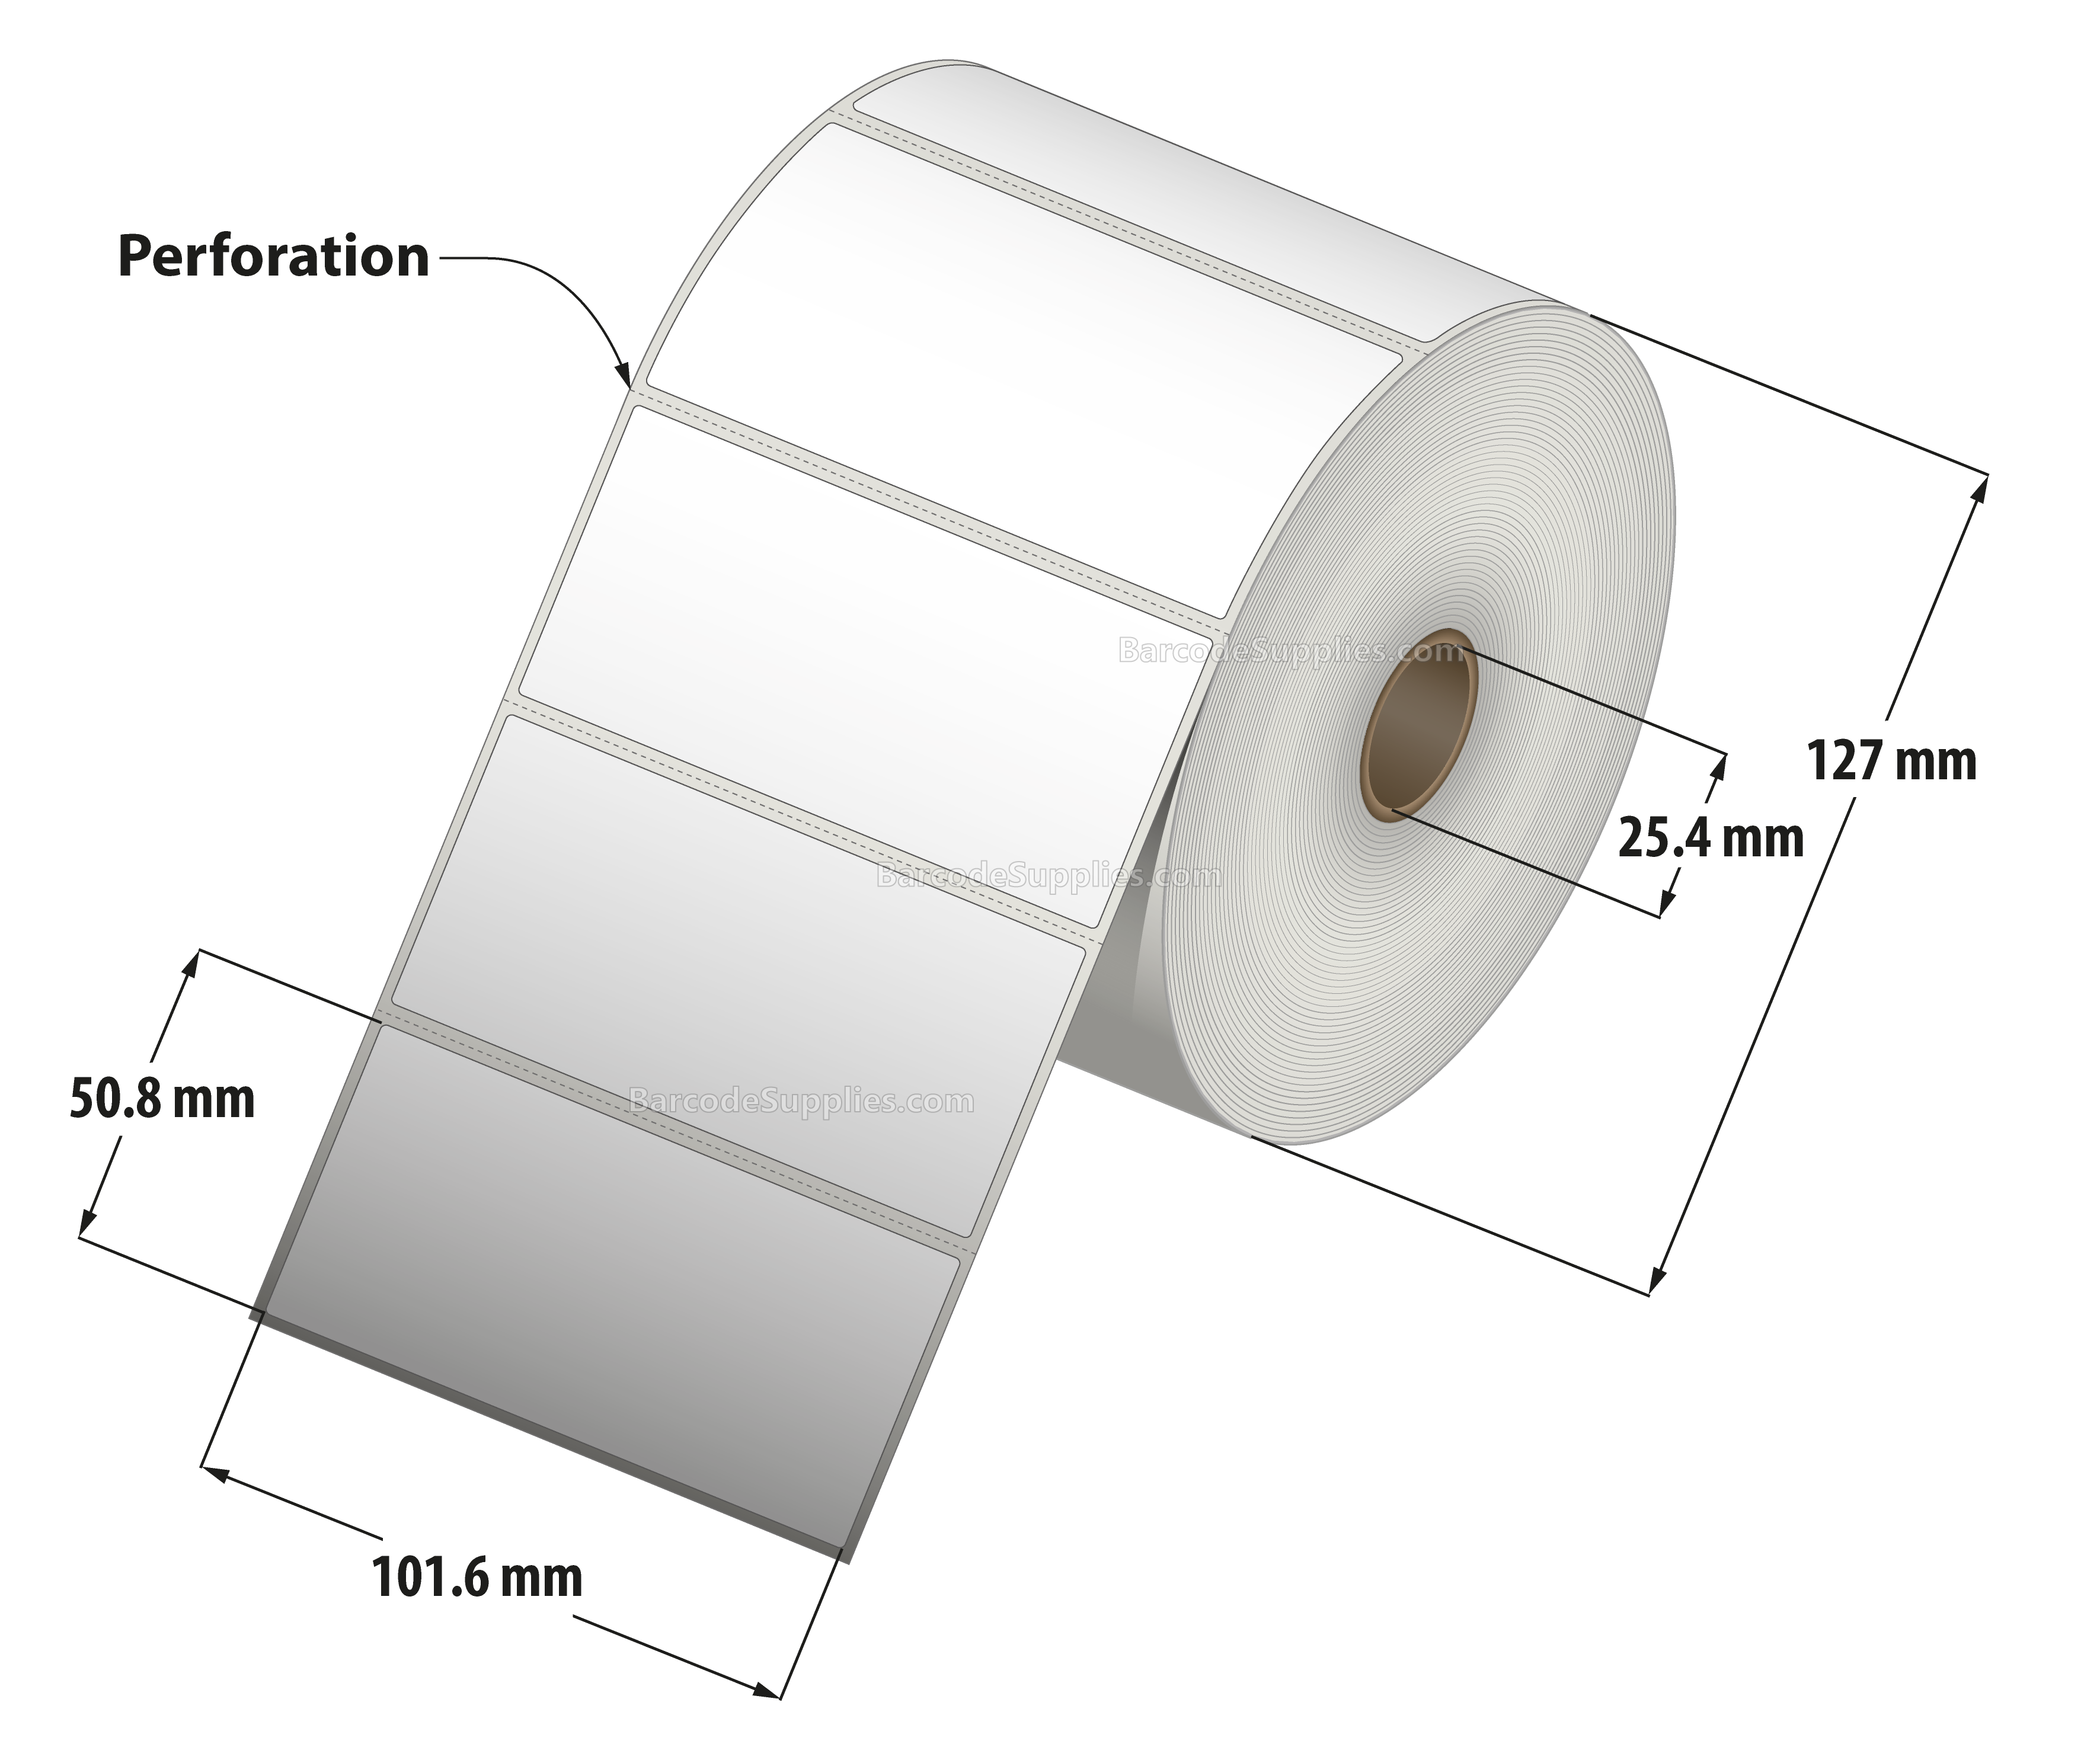 4 x 2 Thermal Transfer White Labels With Permanent Adhesive - Perforated - 1320 Labels Per Roll - Carton Of 12 Rolls - 15840 Labels Total - MPN: RT-4-2-1320-1 - BarcodeSource, Inc.